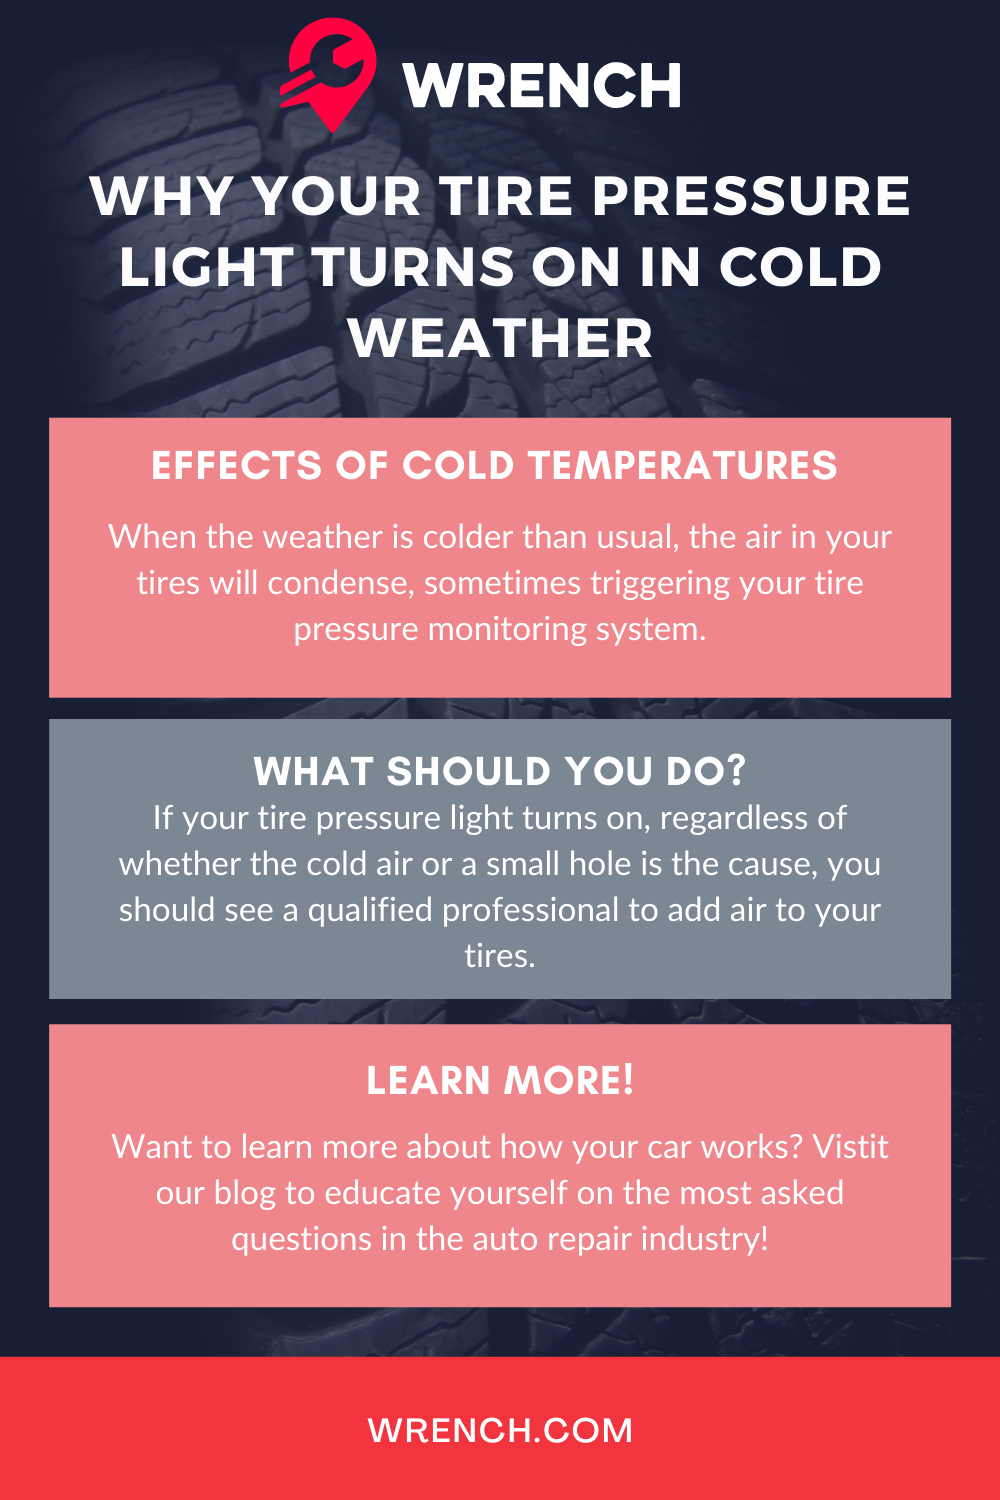 tire pressure light turns on in cold weather infographic